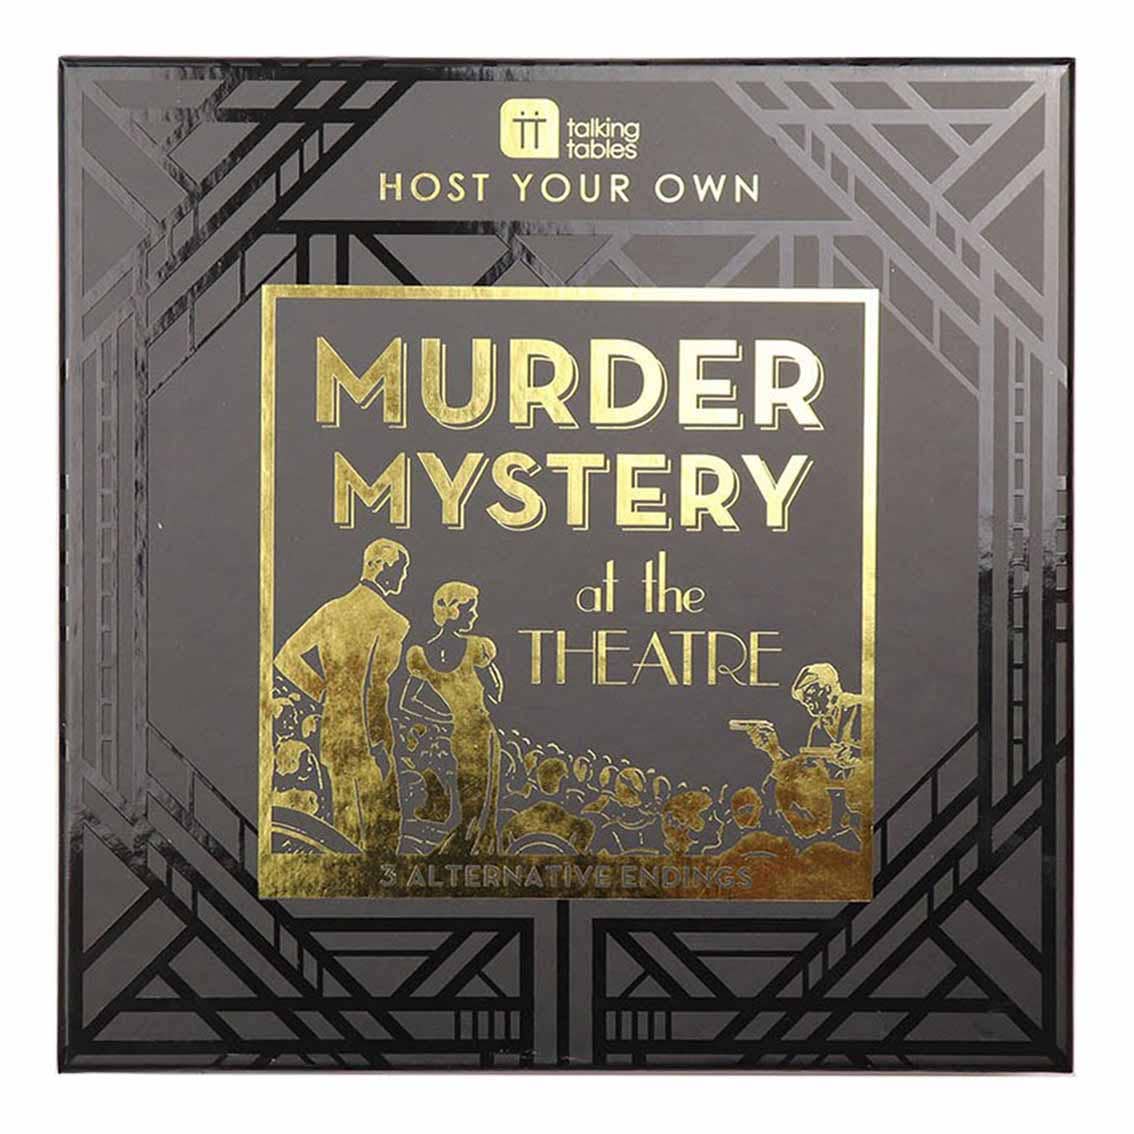 Host Your Own Murder Mystery at the Manor – Talking Tables US Trade